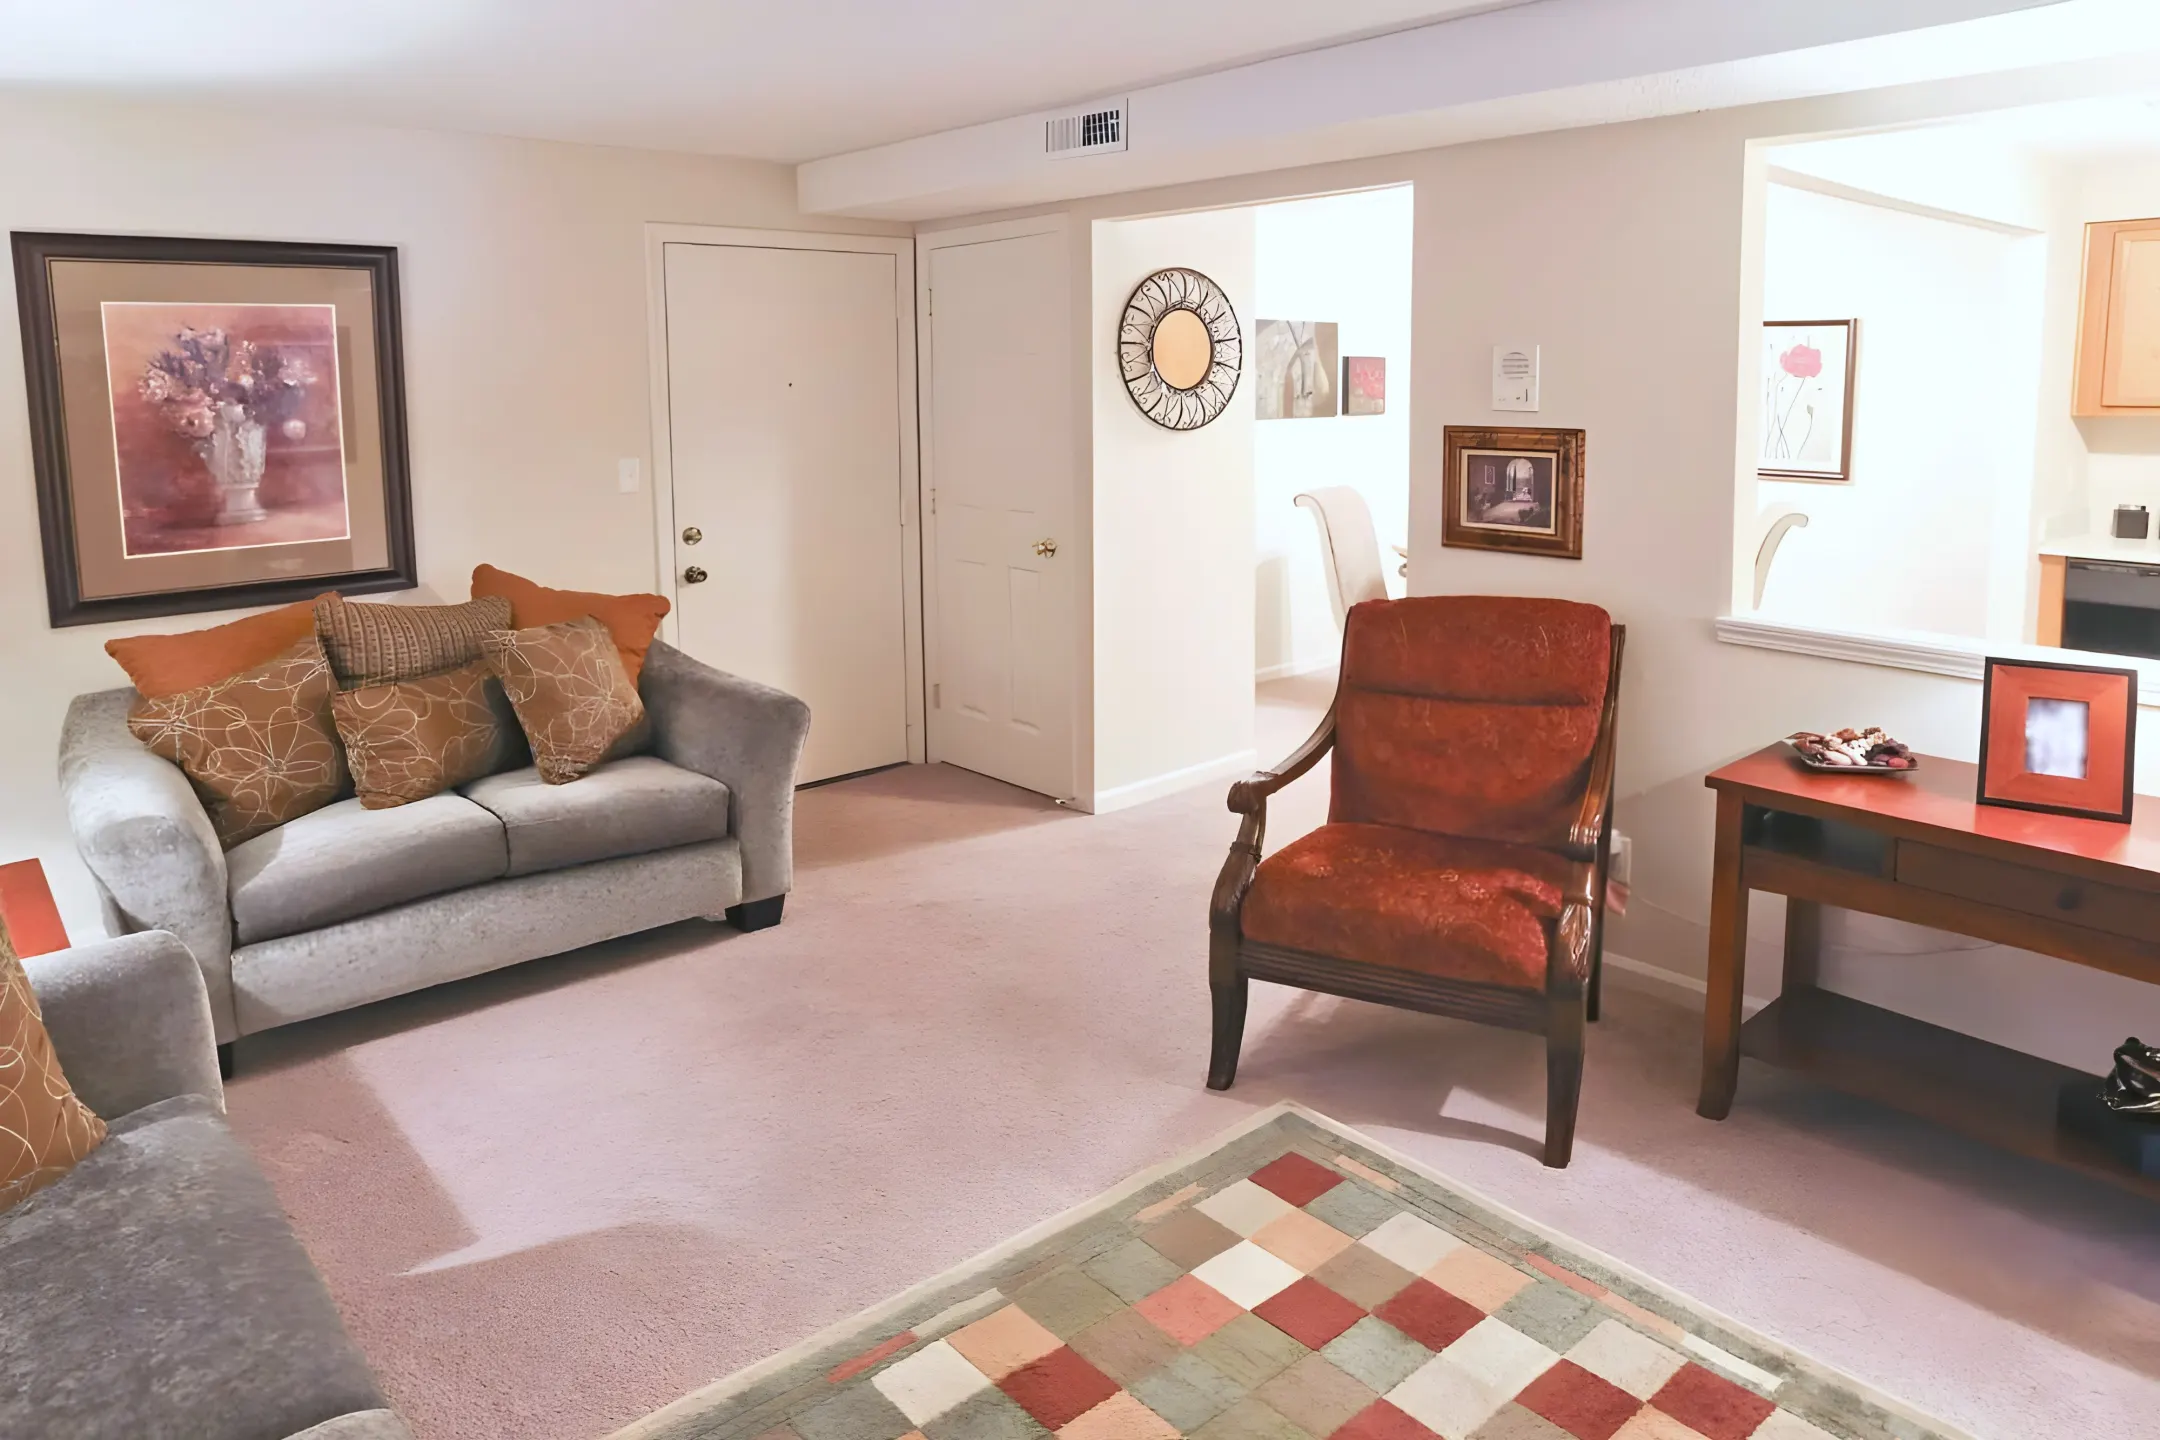 Living Room - Regency Court Apartments - Orchard Park, NY